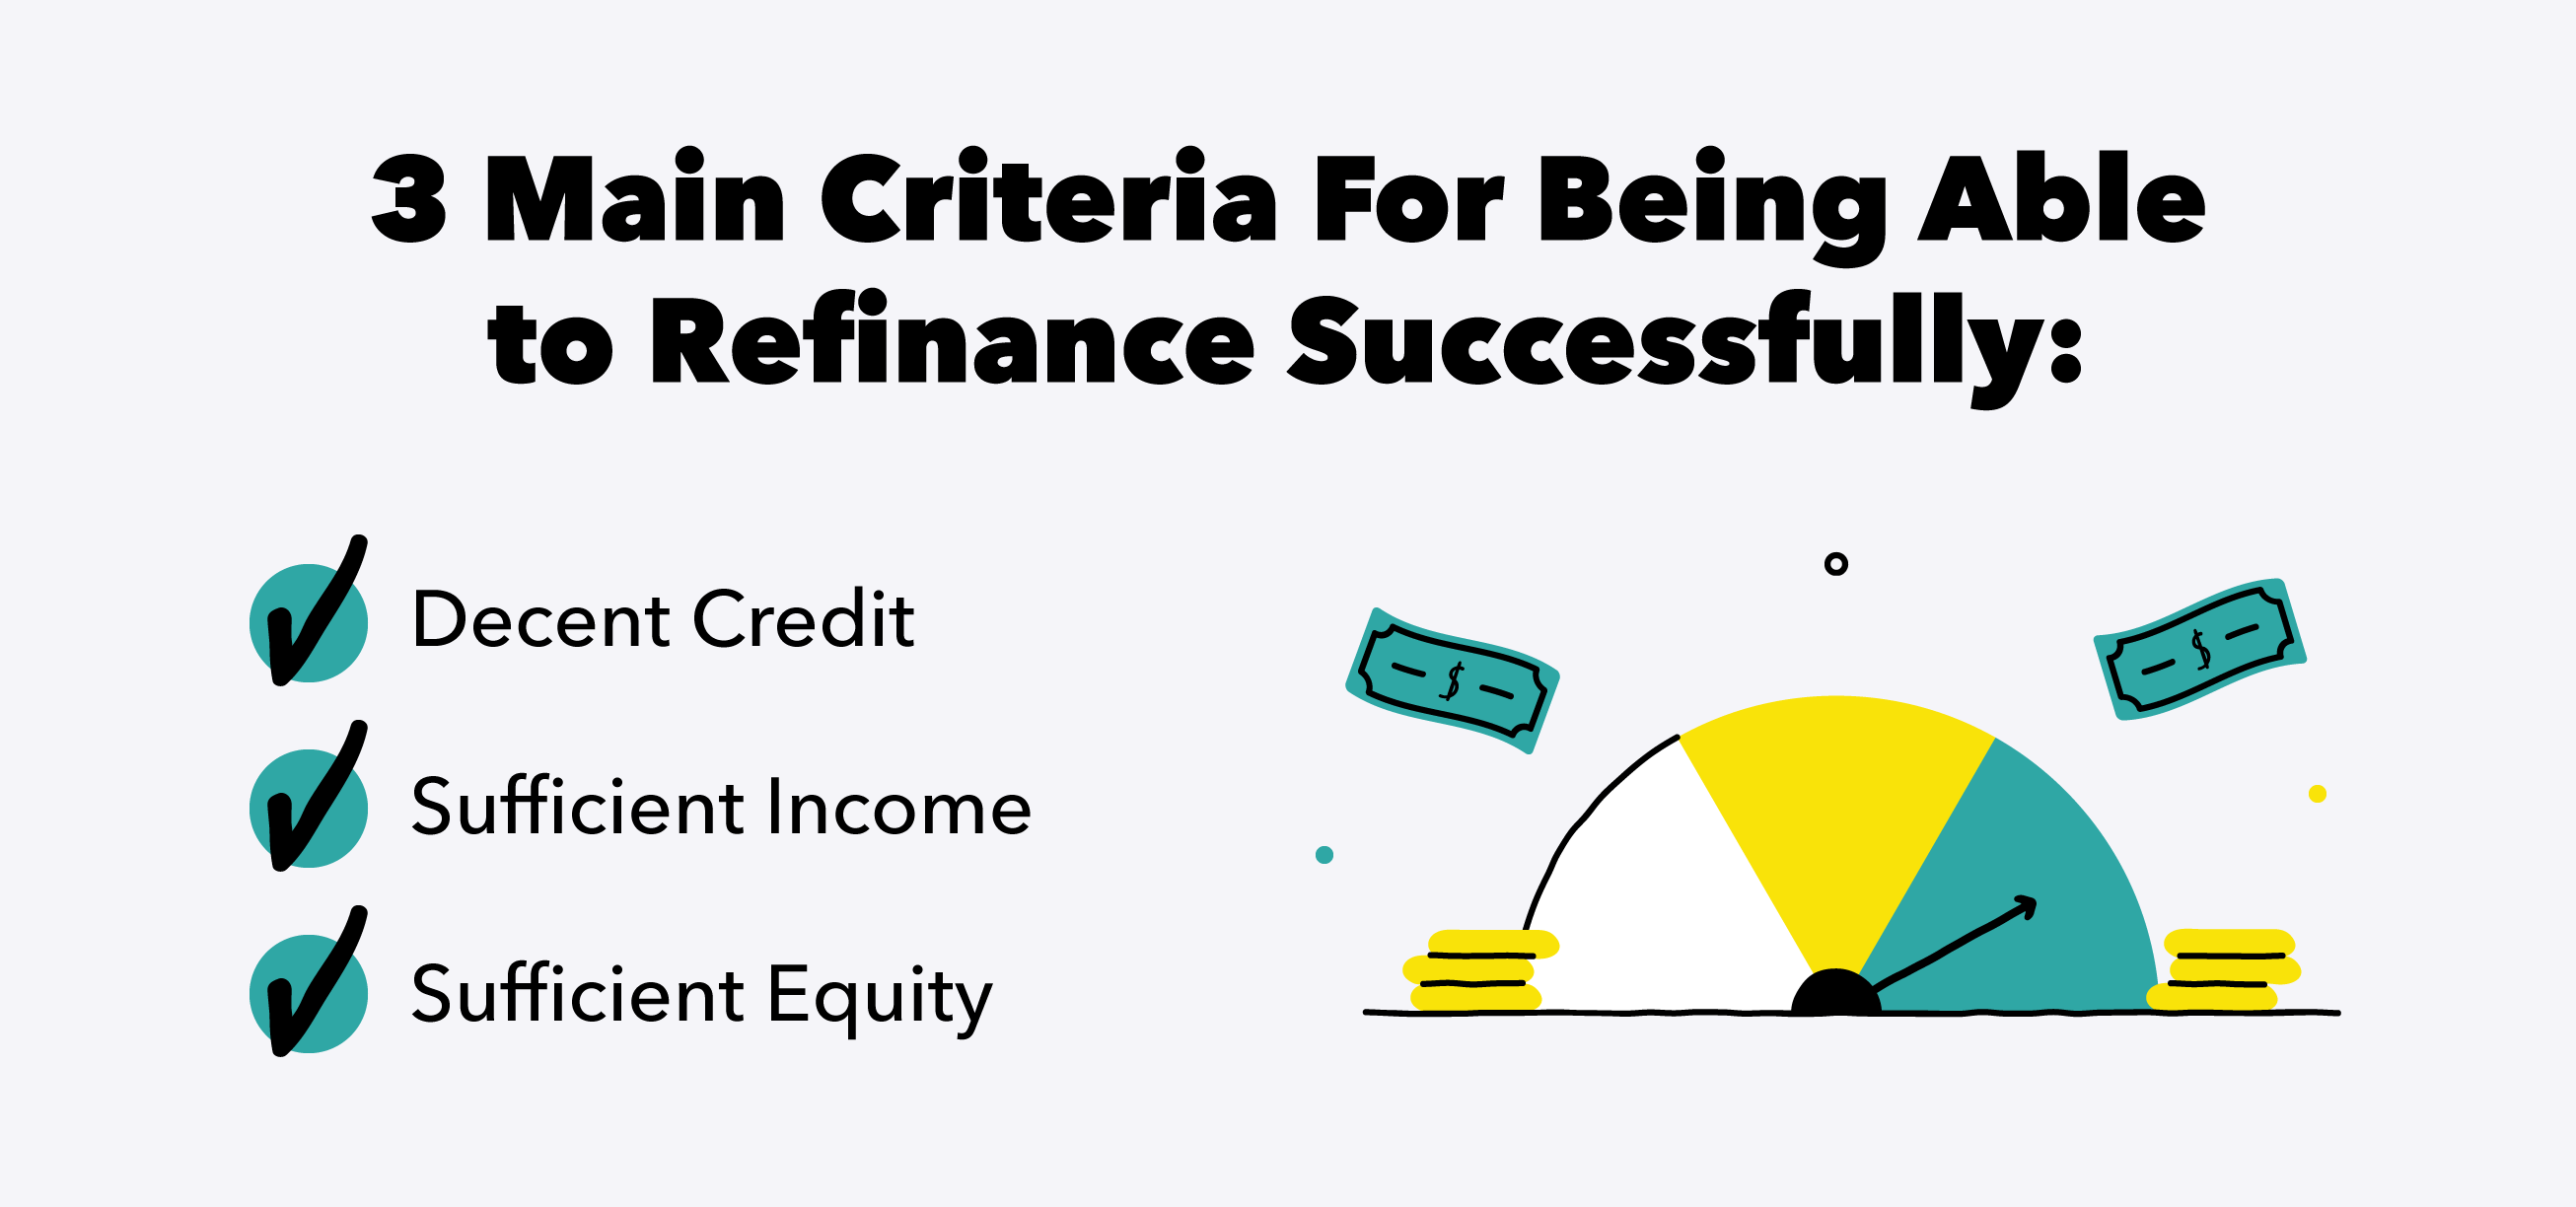 criteria-for-being-able-to-refinance-successfully